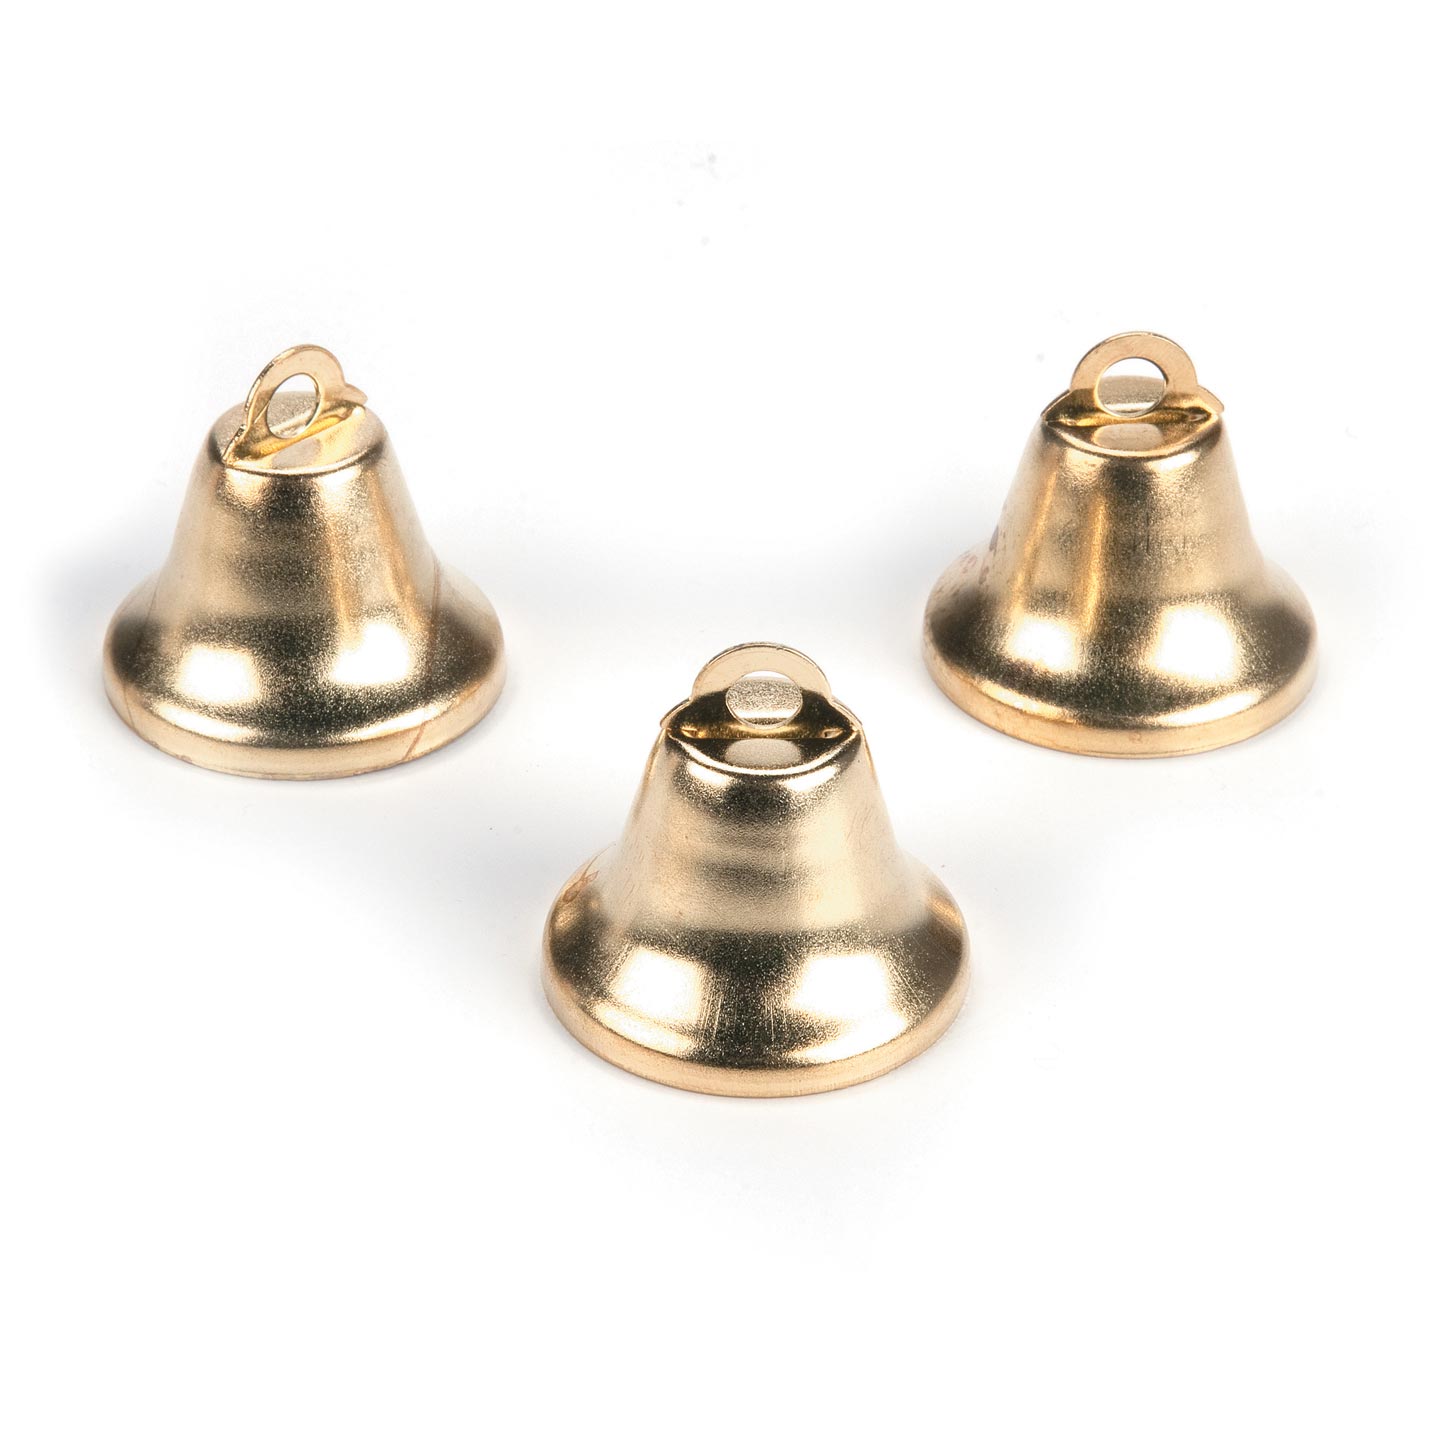 20 Pieces Bells for Crafts Small Bell Bells Metal Cow Gold